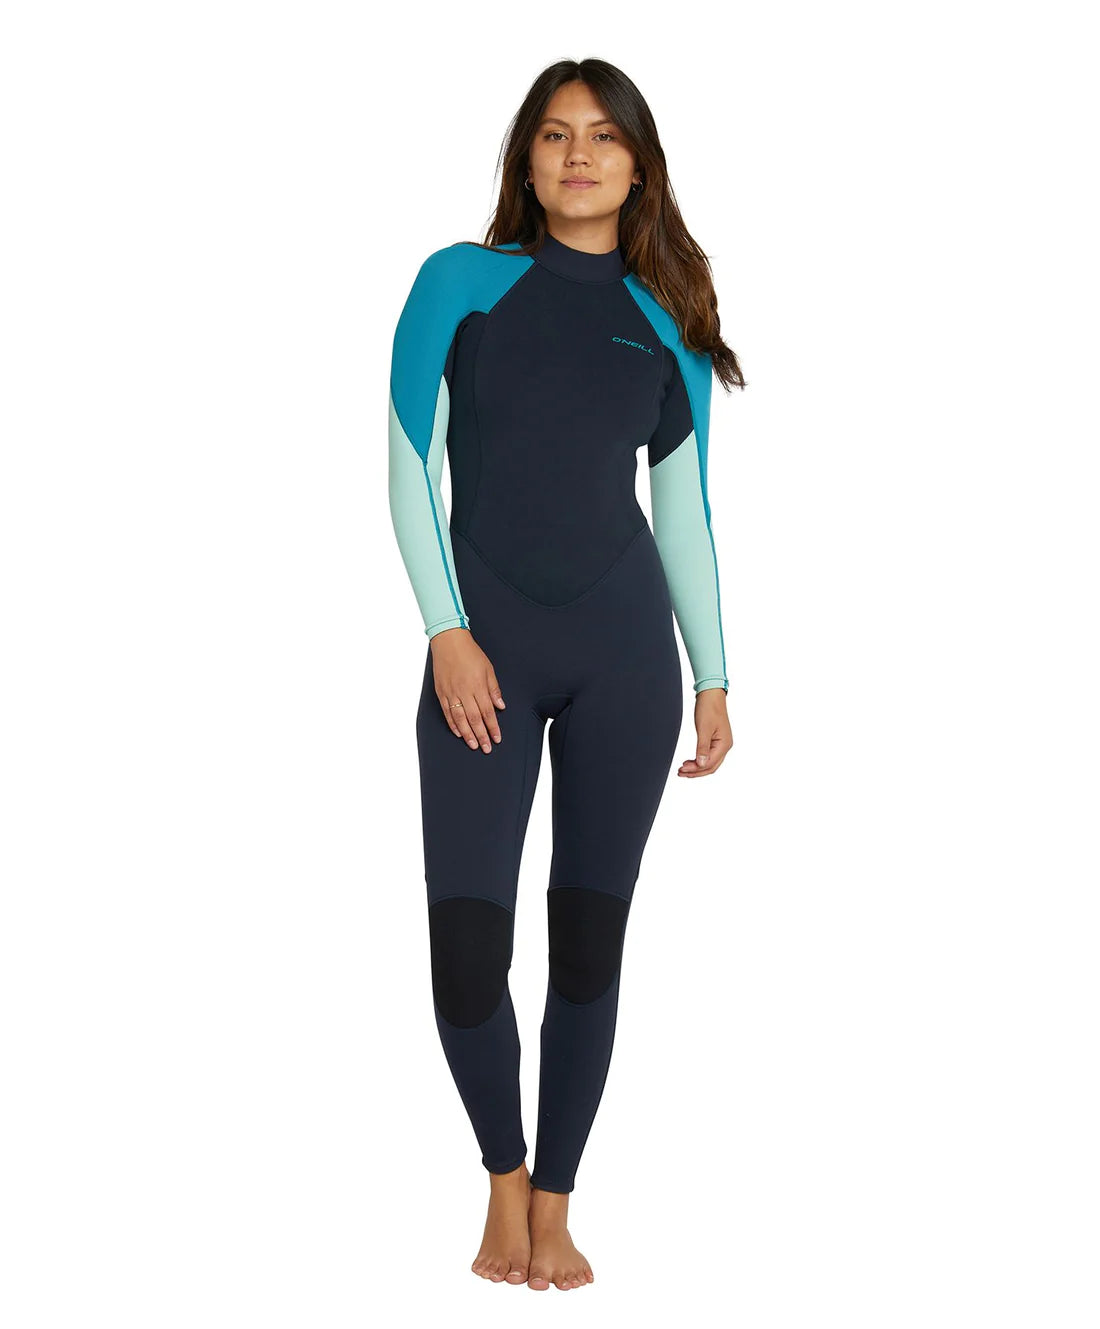 WETSUIT MUJER - WMNS REACTOR 2 BZ FULL 3/2MM 3S09 ABY/MRCO/LAGN